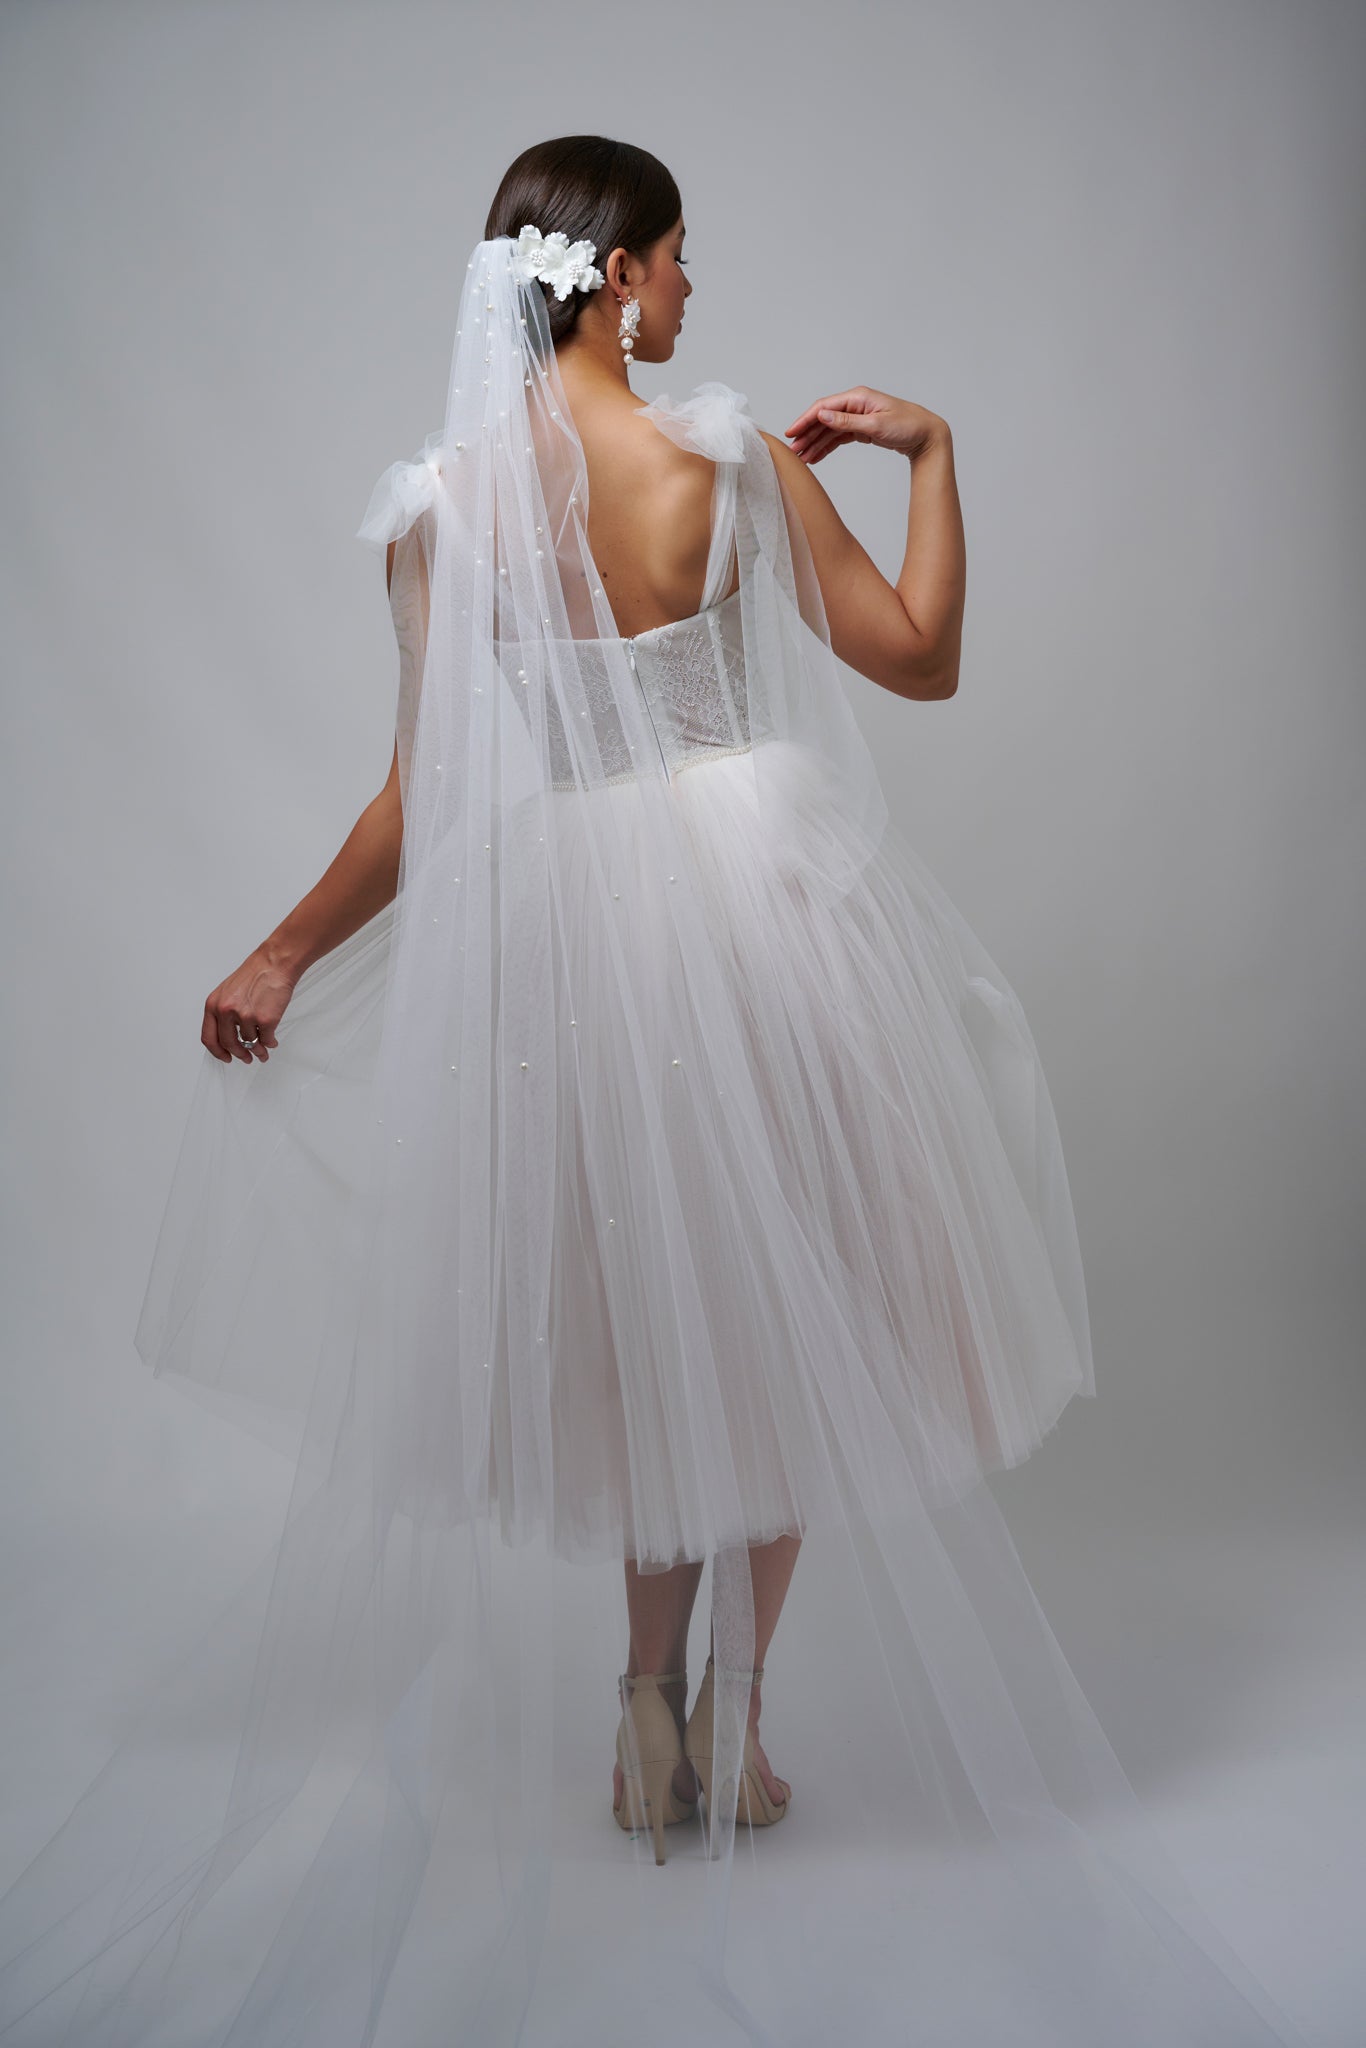 woman wearing pearl bridal veil with tulle wedding dress and nude heels